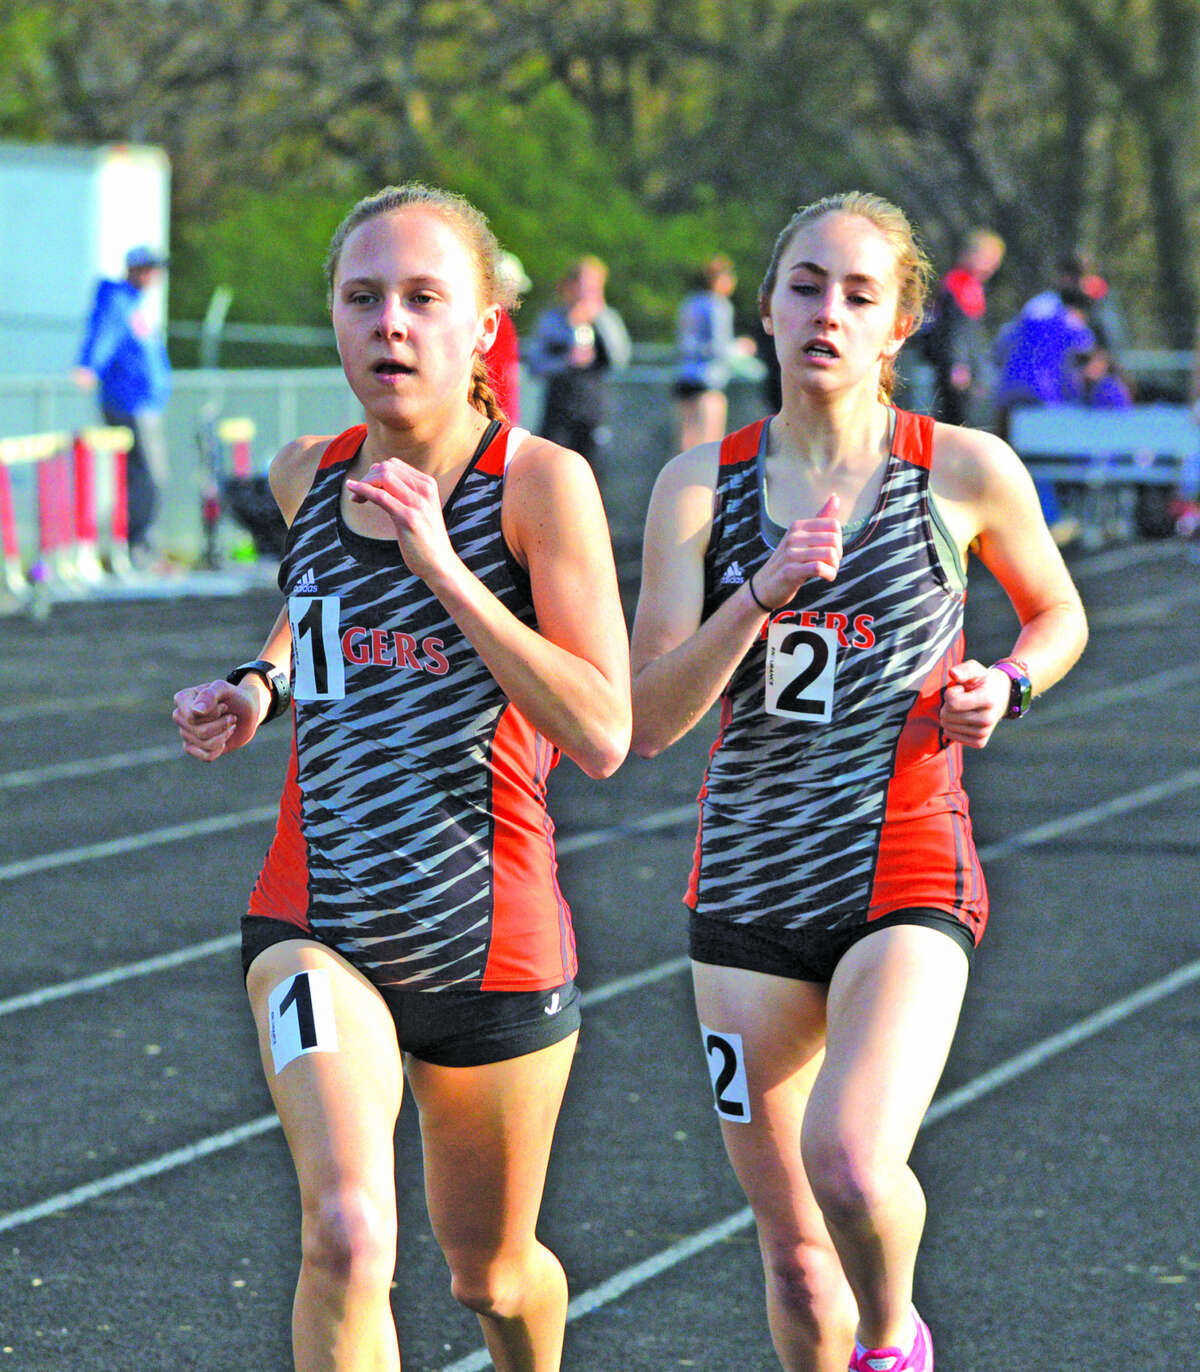 Edwardsville’s Abby Schrobilgen, left, and Hannah Stuart placed first and second, respectively, in the 3,200-meter run in Tuesday’s Madison County Large School Meet at Highland.